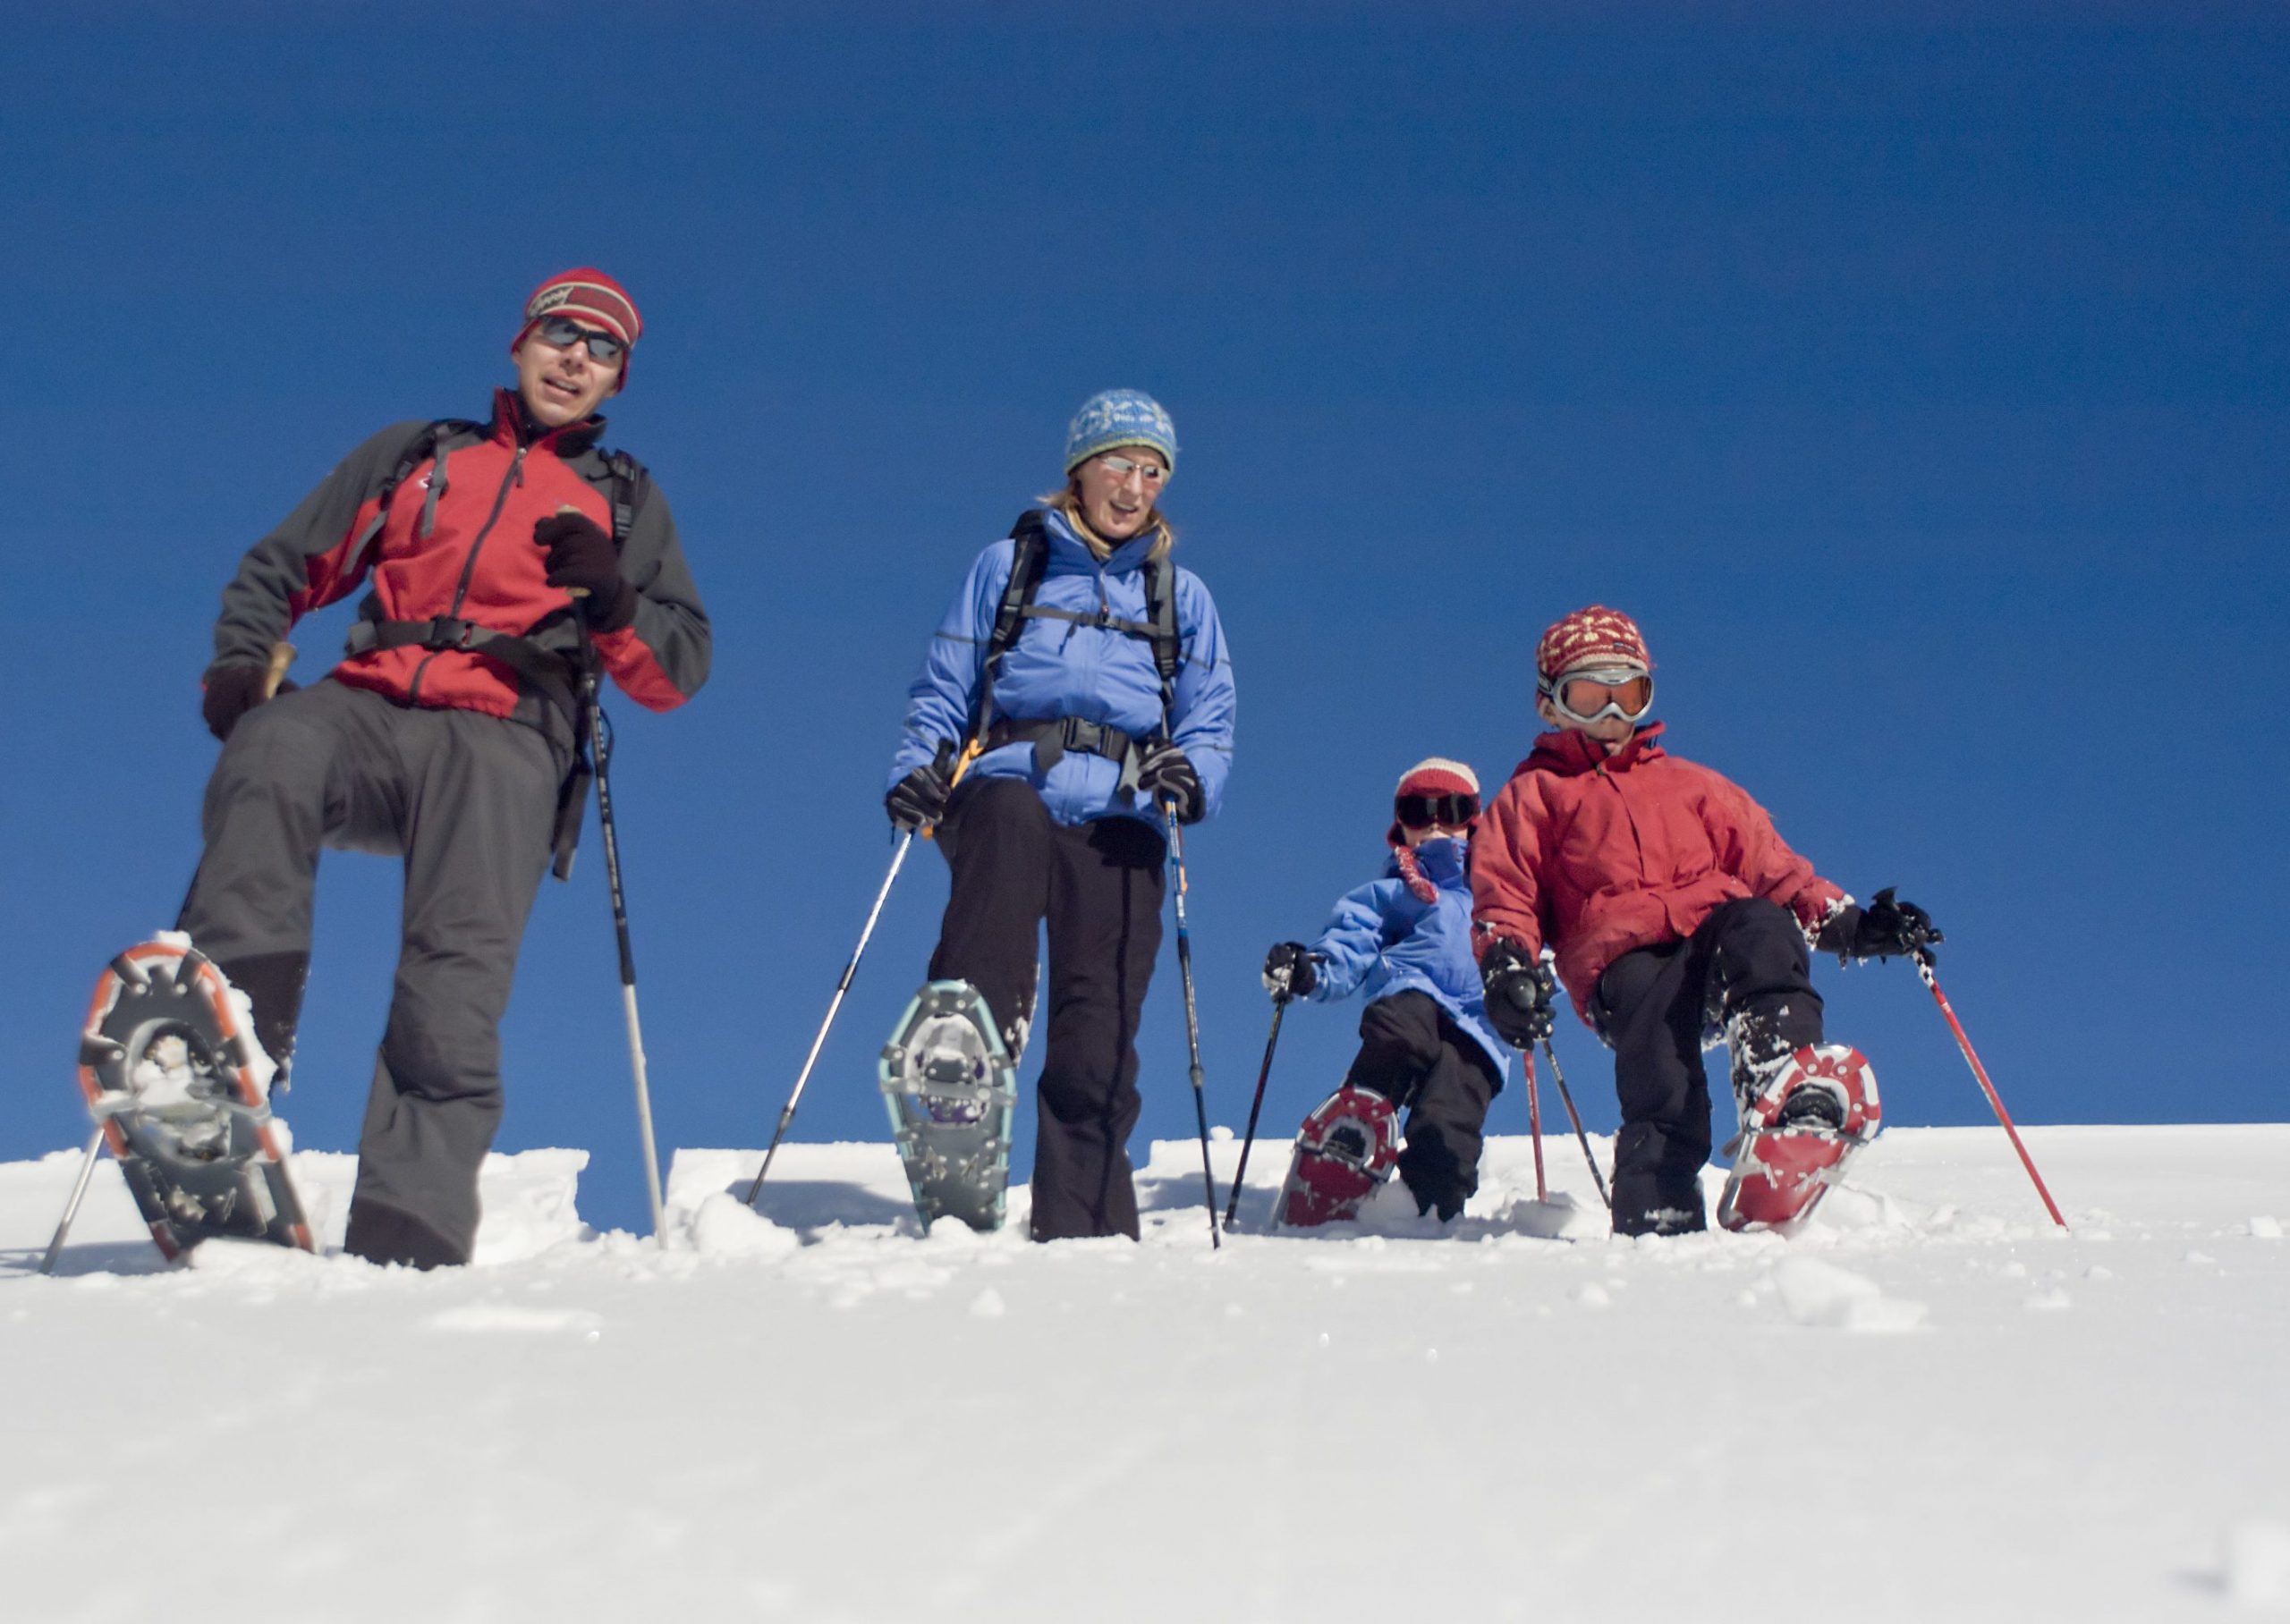 A family of four enjoys a snowshoeing excursion on a bright